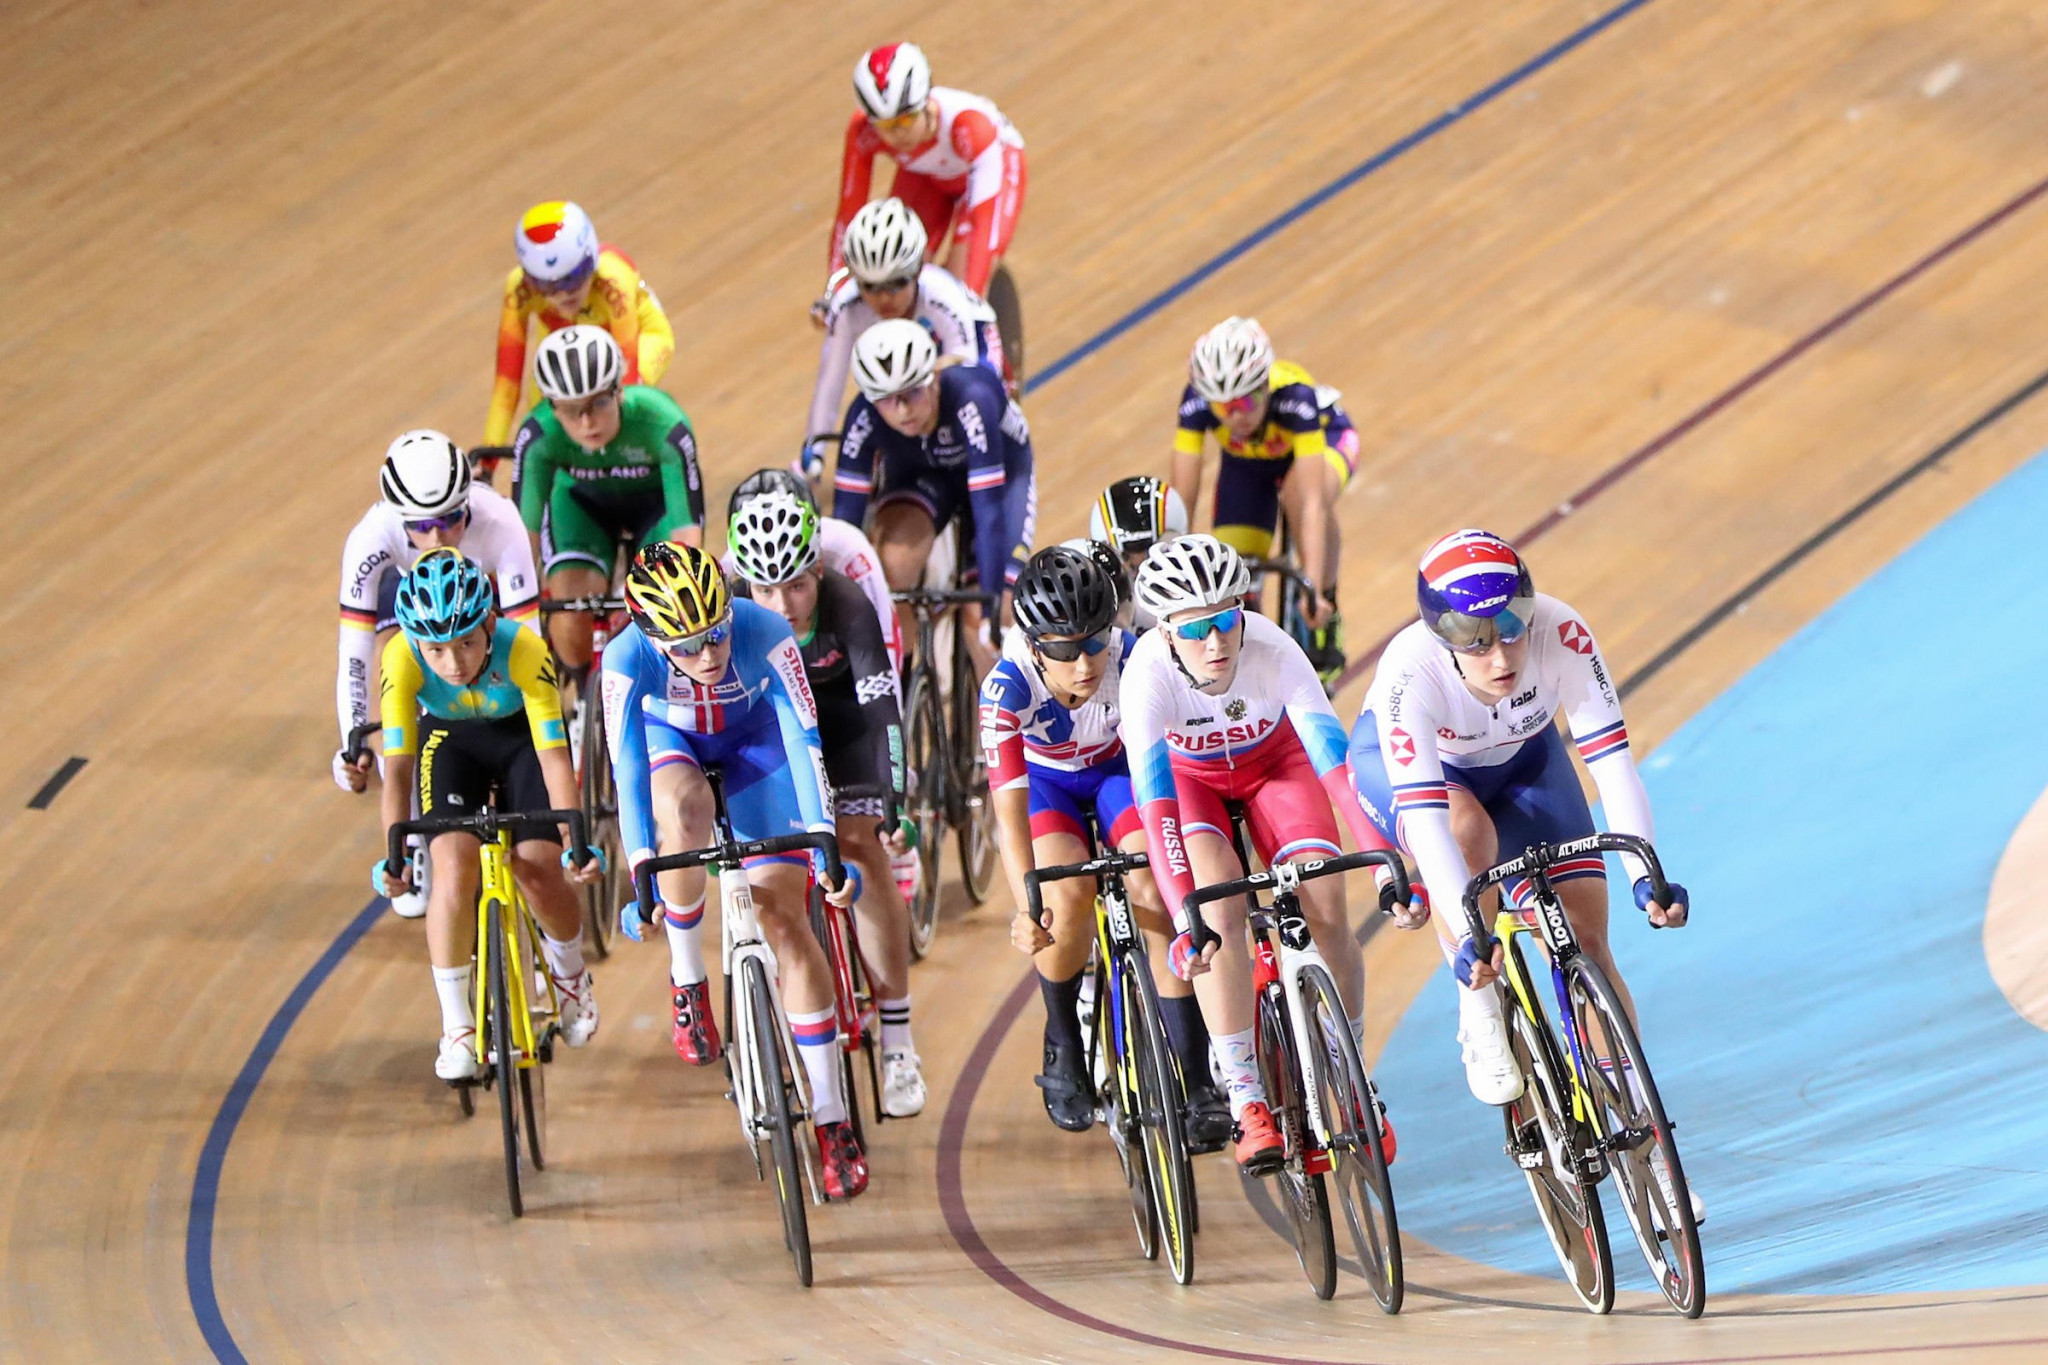 Sibley claims scratch race gold at UCI Junior Track Cycling World Championships